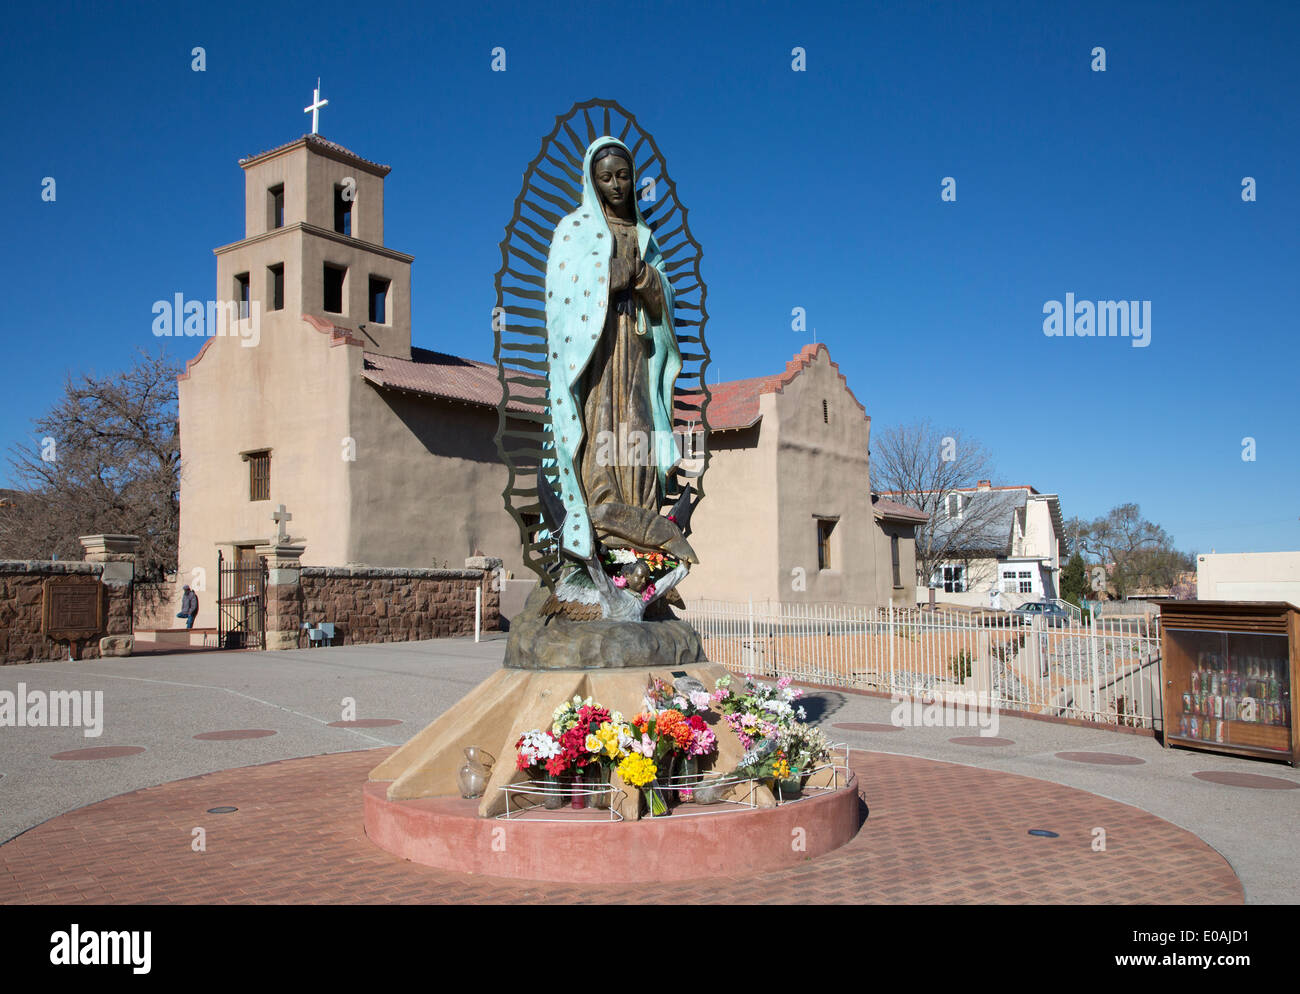 Our Lady of Guadalupe statue at El Santuario de Guadalupe, an old mission church built in 1781, with blue sky in Santa Fe, New Mexico, USA Stock Photo